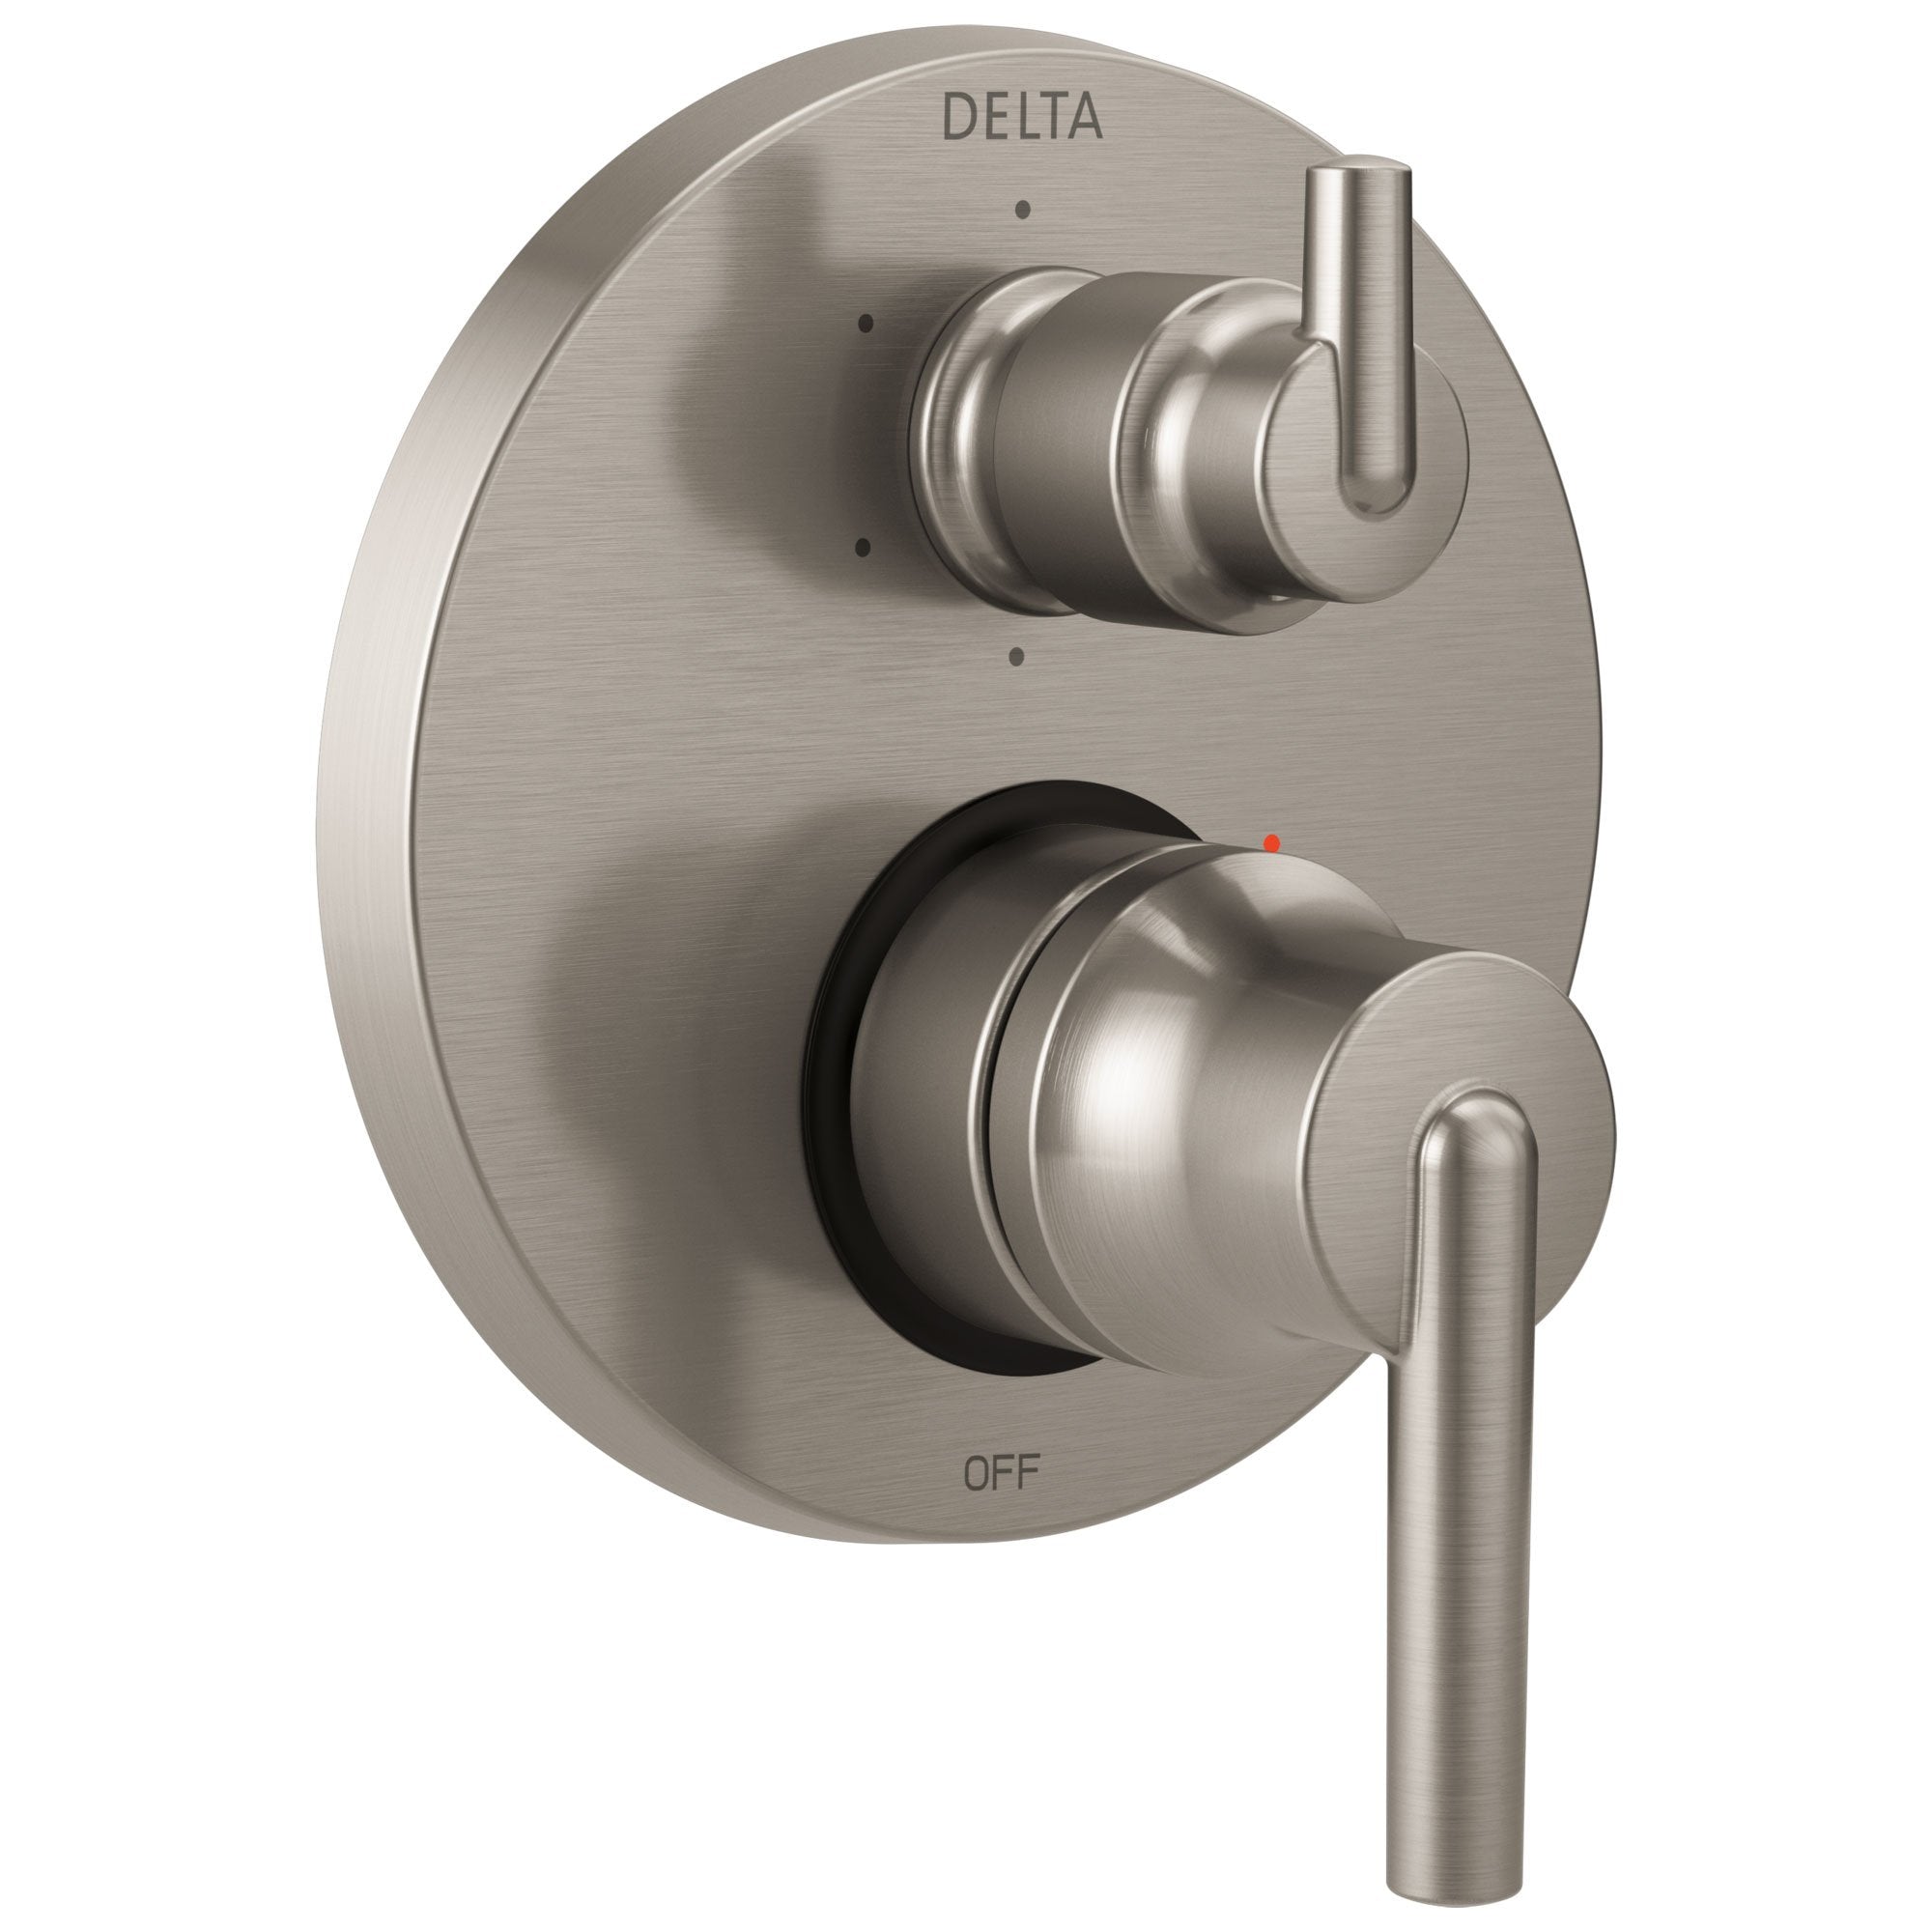 Delta Trinsic Stainless Steel Finish Shower Faucet Control Handle with 6-Setting Integrated Diverter Includes Trim Kit and Rough-in Valve with Stops D2197V